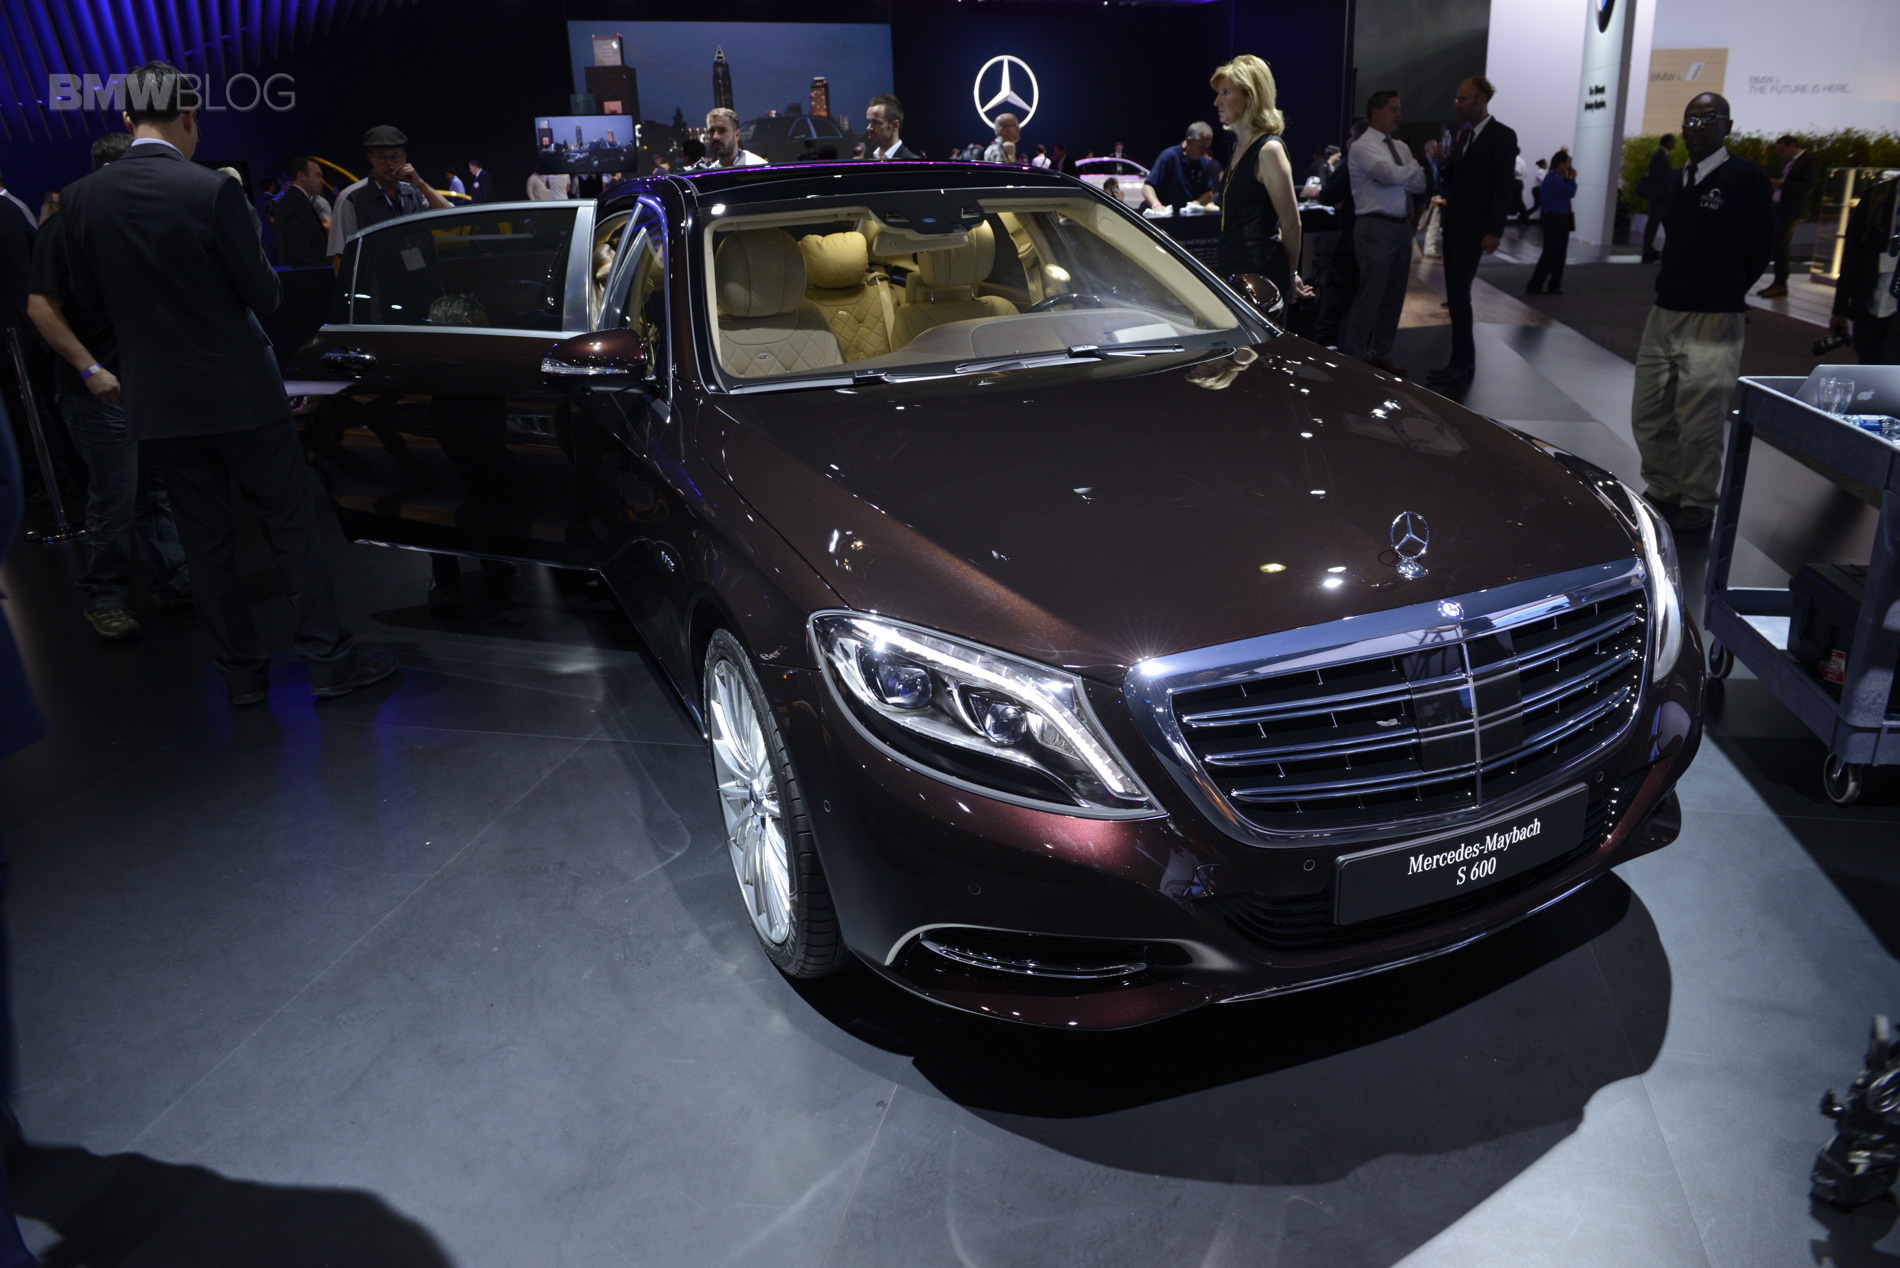 Mercedes Maybach S600 images 09